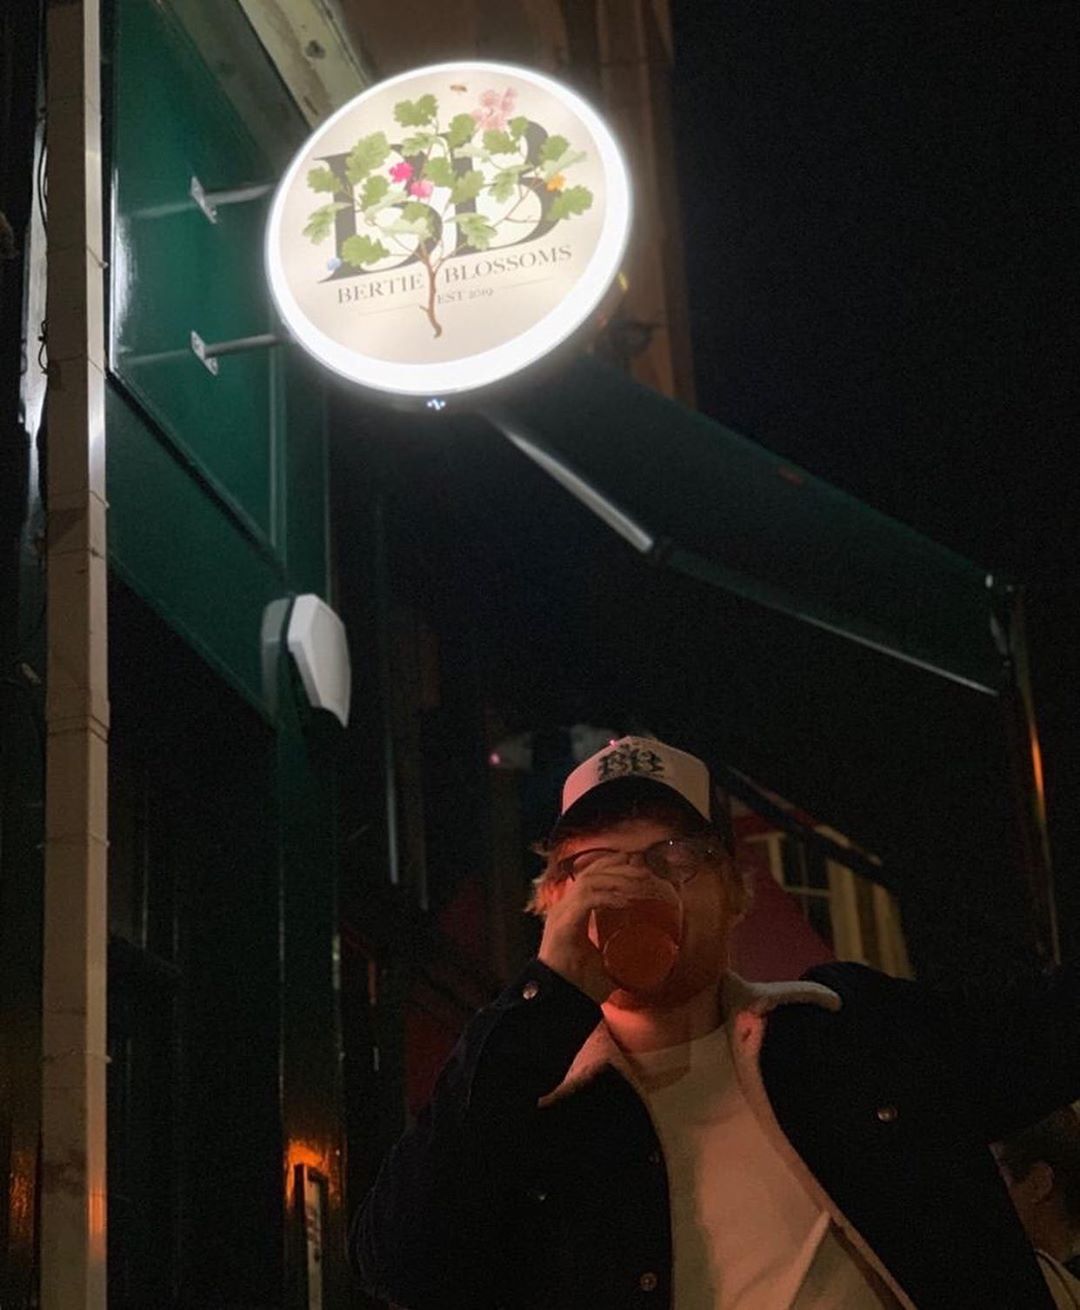 ed-sheeran-takes-temporary-break-from-music-to-open-beer-pub-3